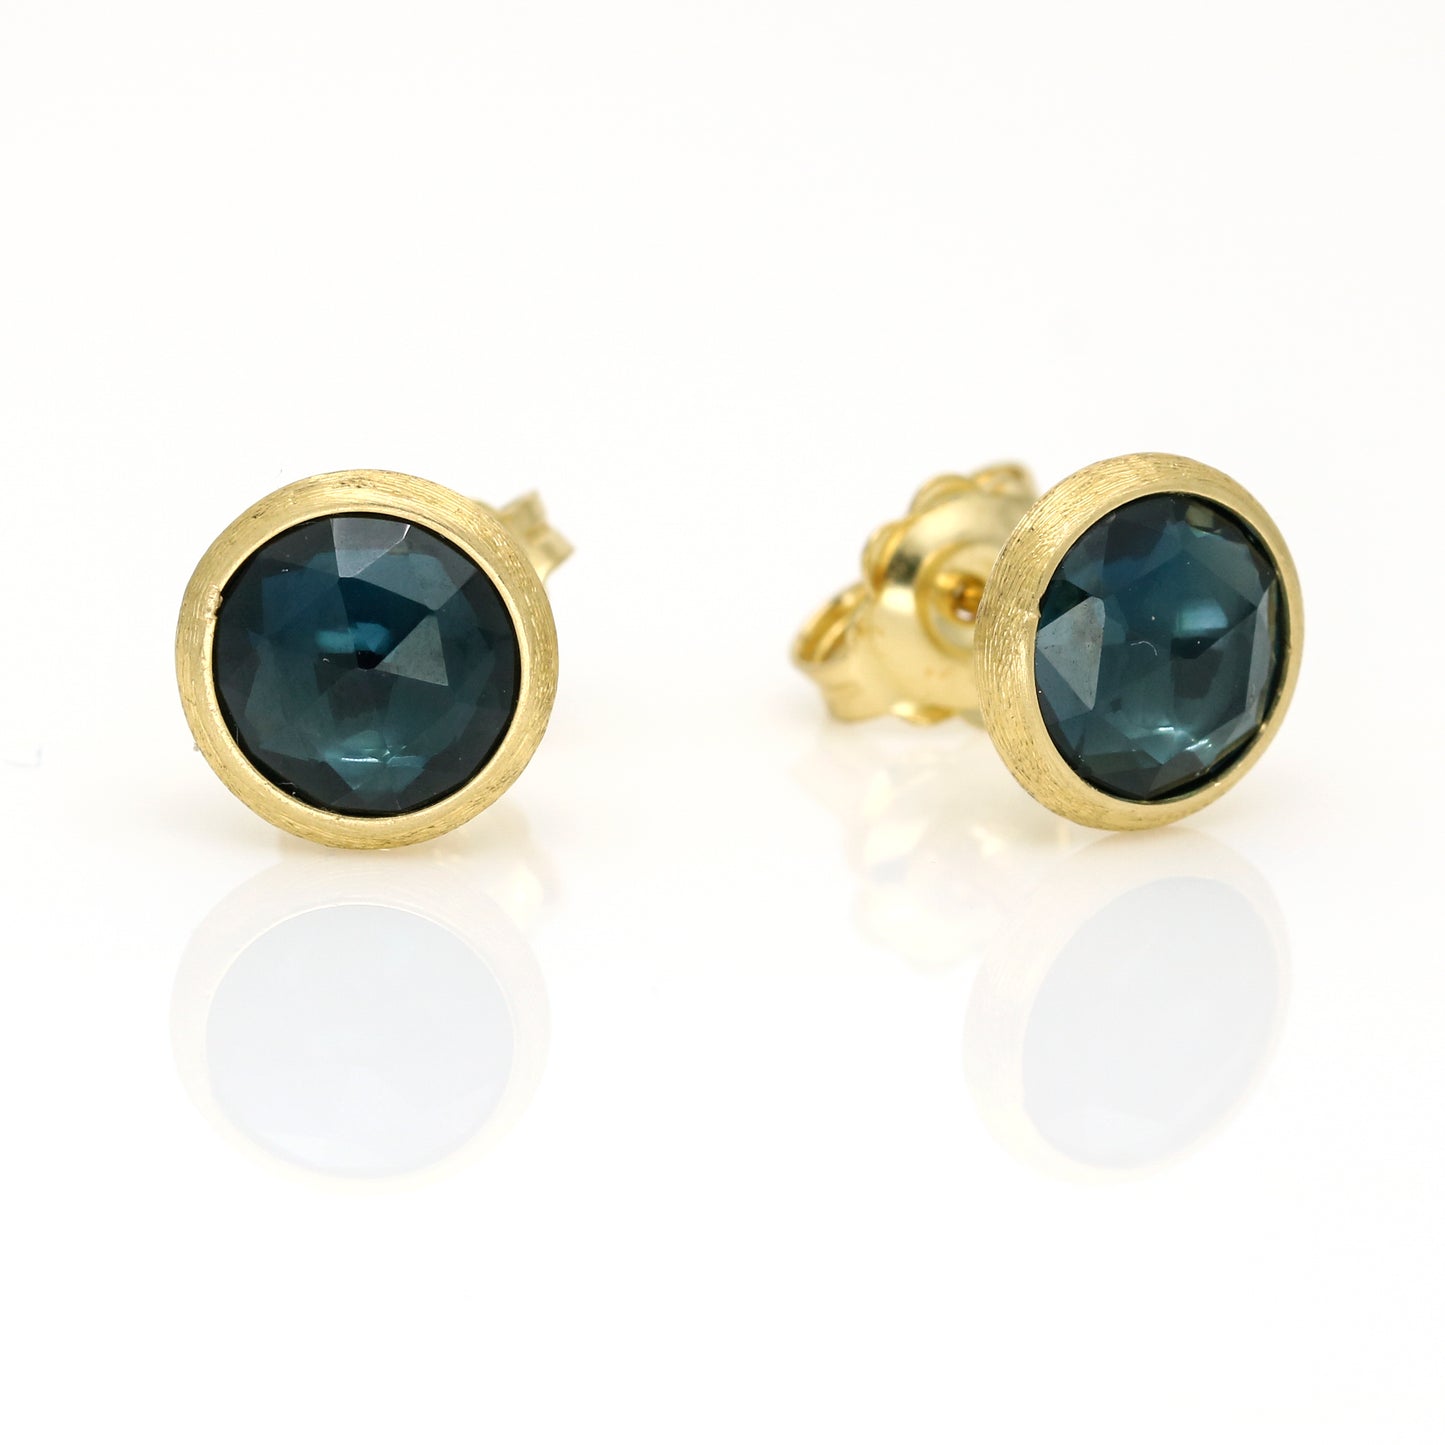 Marco Bicego Jaipur Color Collection Hampton Blue Topaz Stud Earrings in 18k Yellow Gold